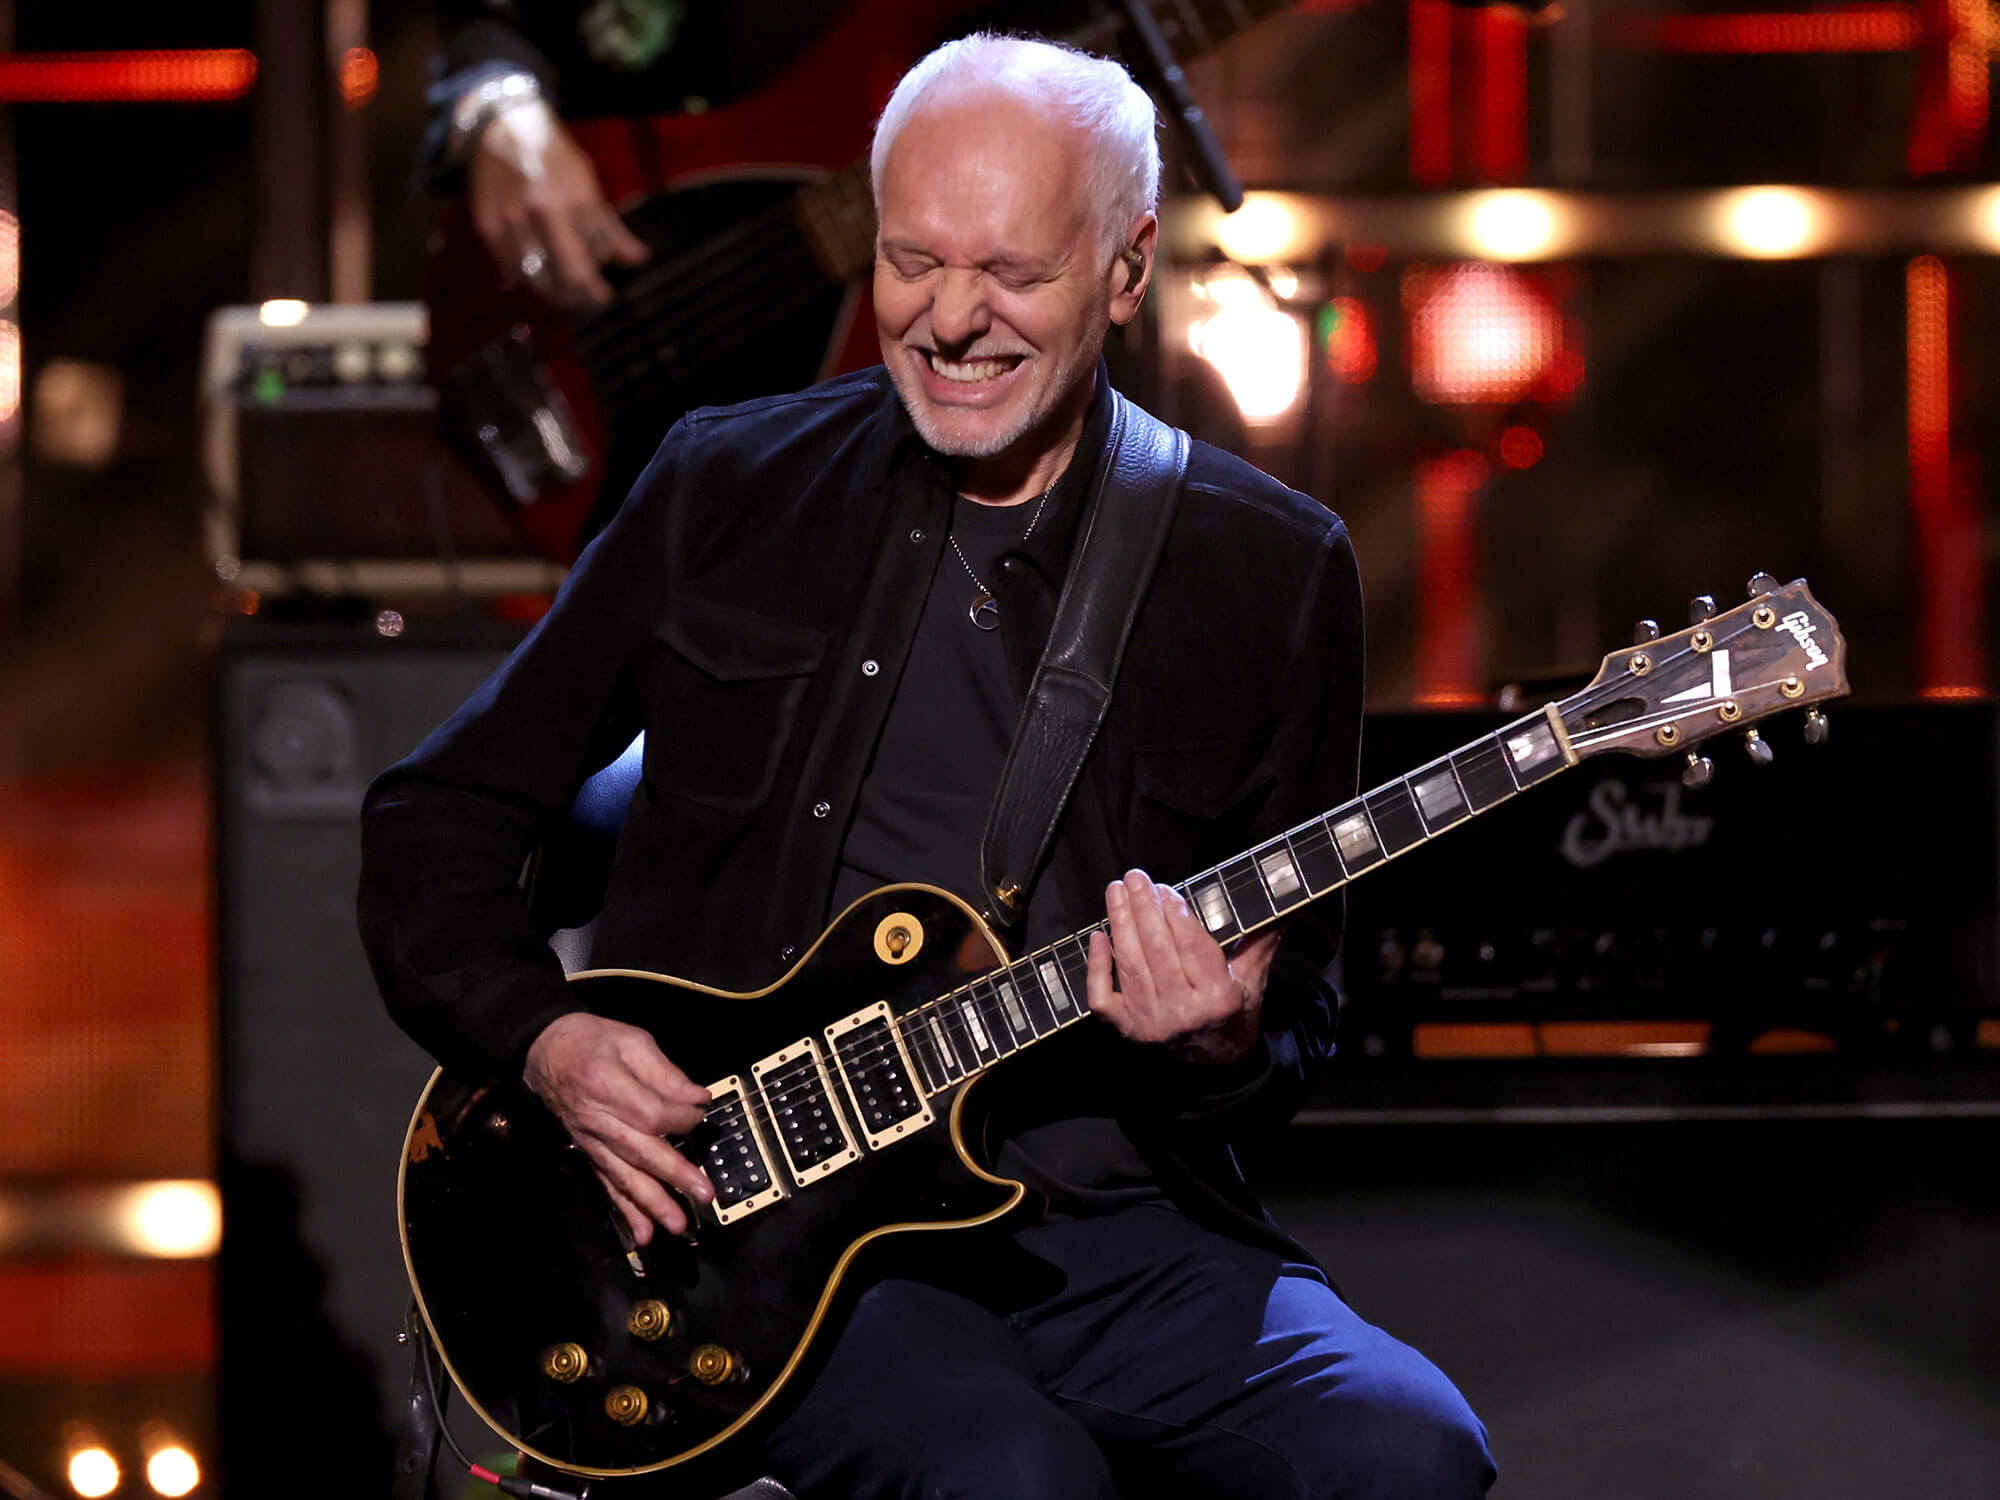 Peter Frampton performing at the 2023 Rock and Roll Hall of Fame induction ceremony